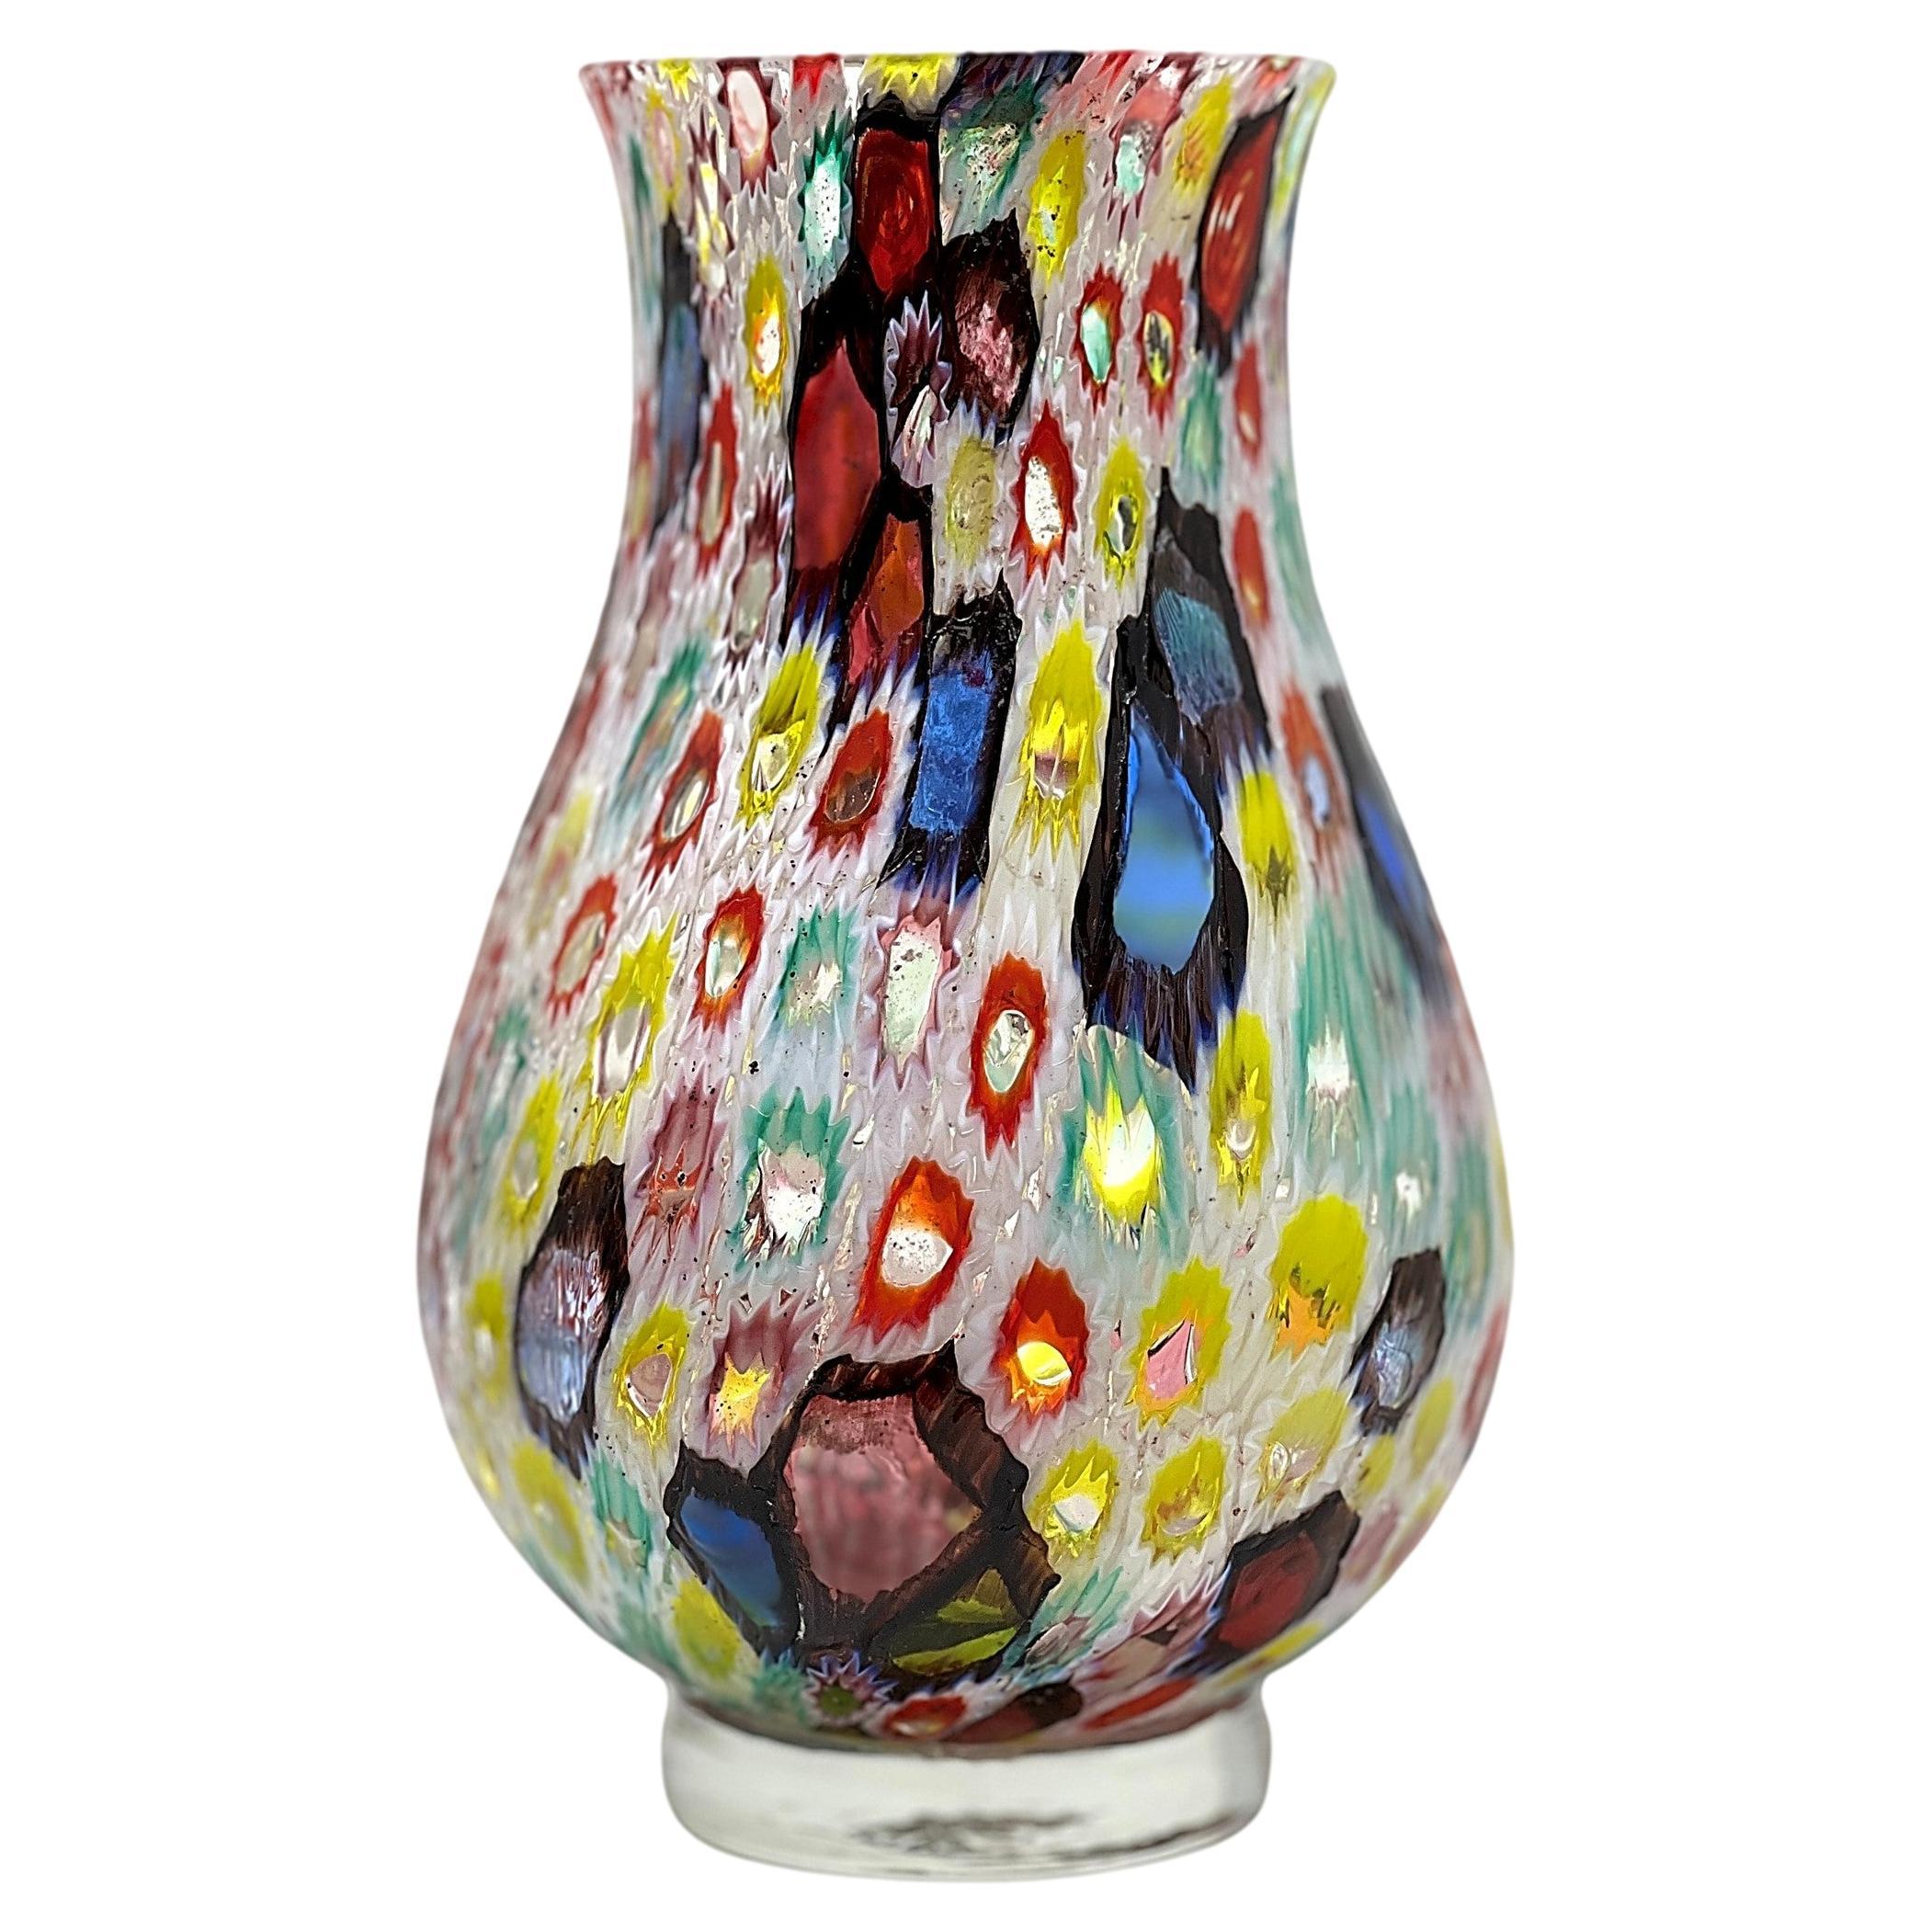 Large Fratelli Toso Murano Millefiori "Stained Windows" Glass Vase, Documented